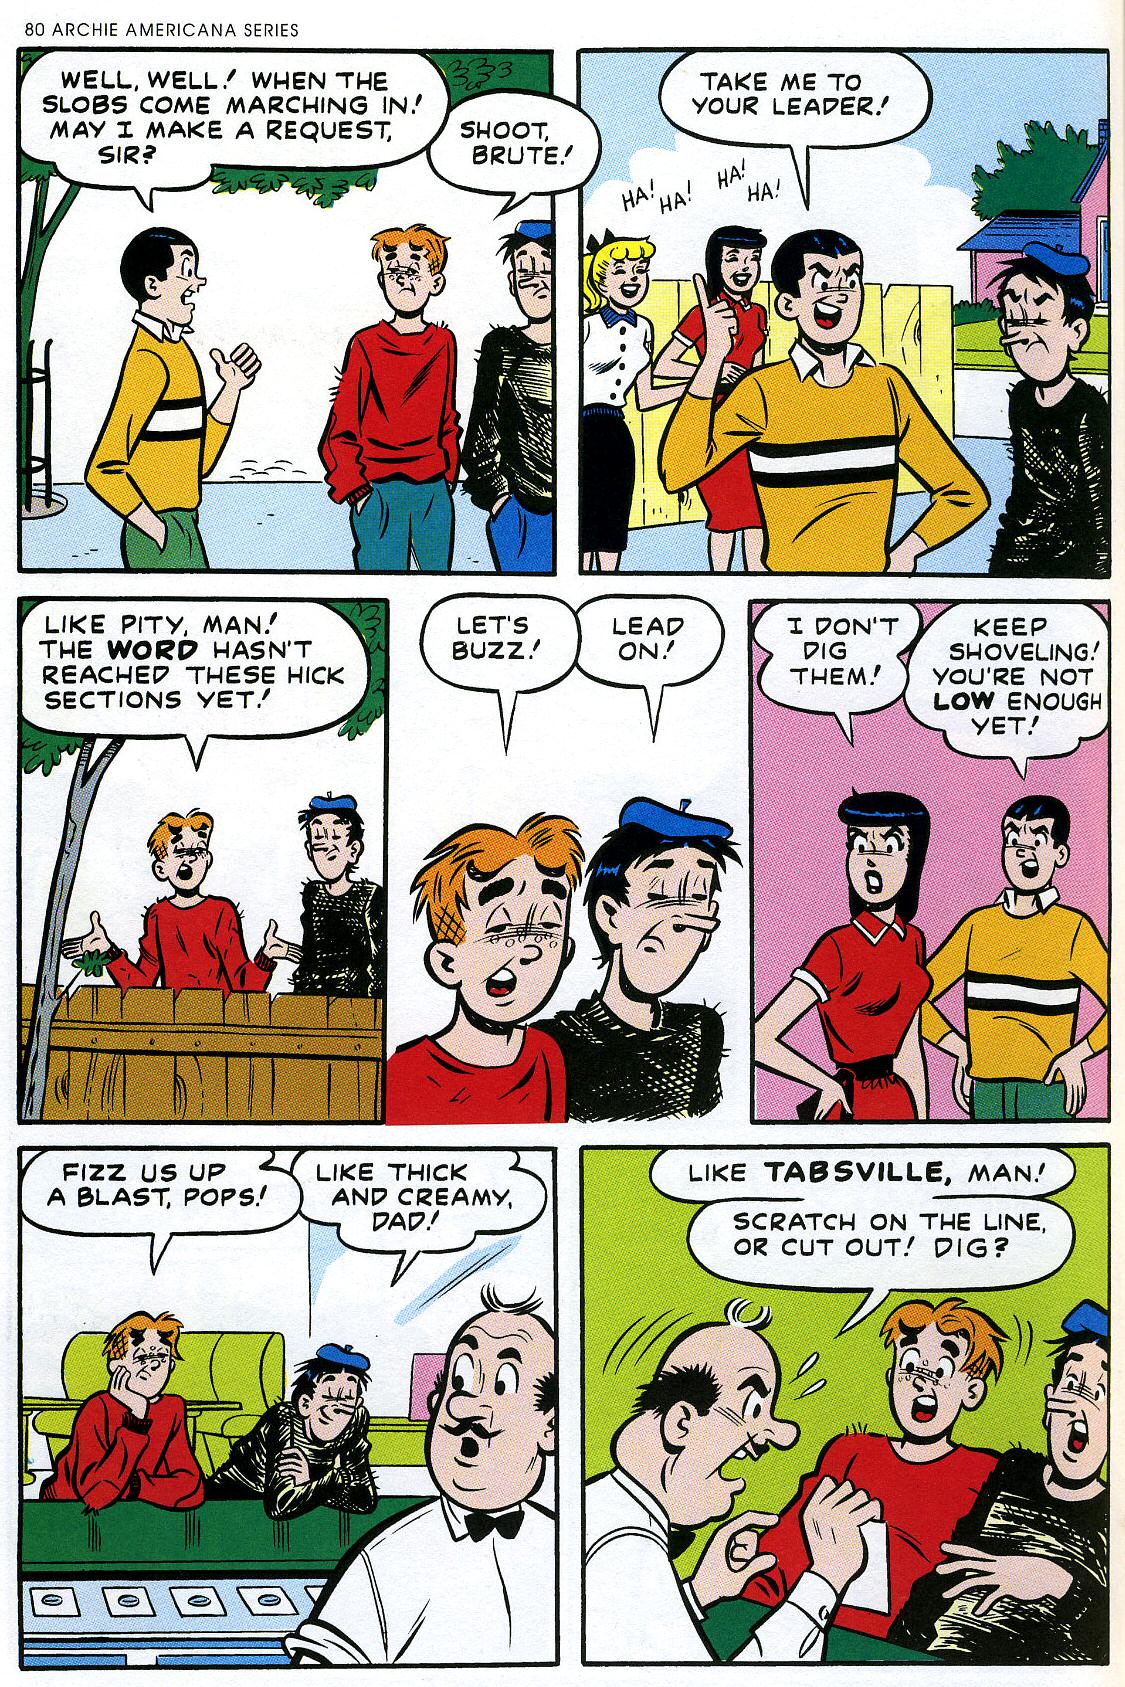 Read online Archie Americana Series comic -  Issue # TPB 2 - 82